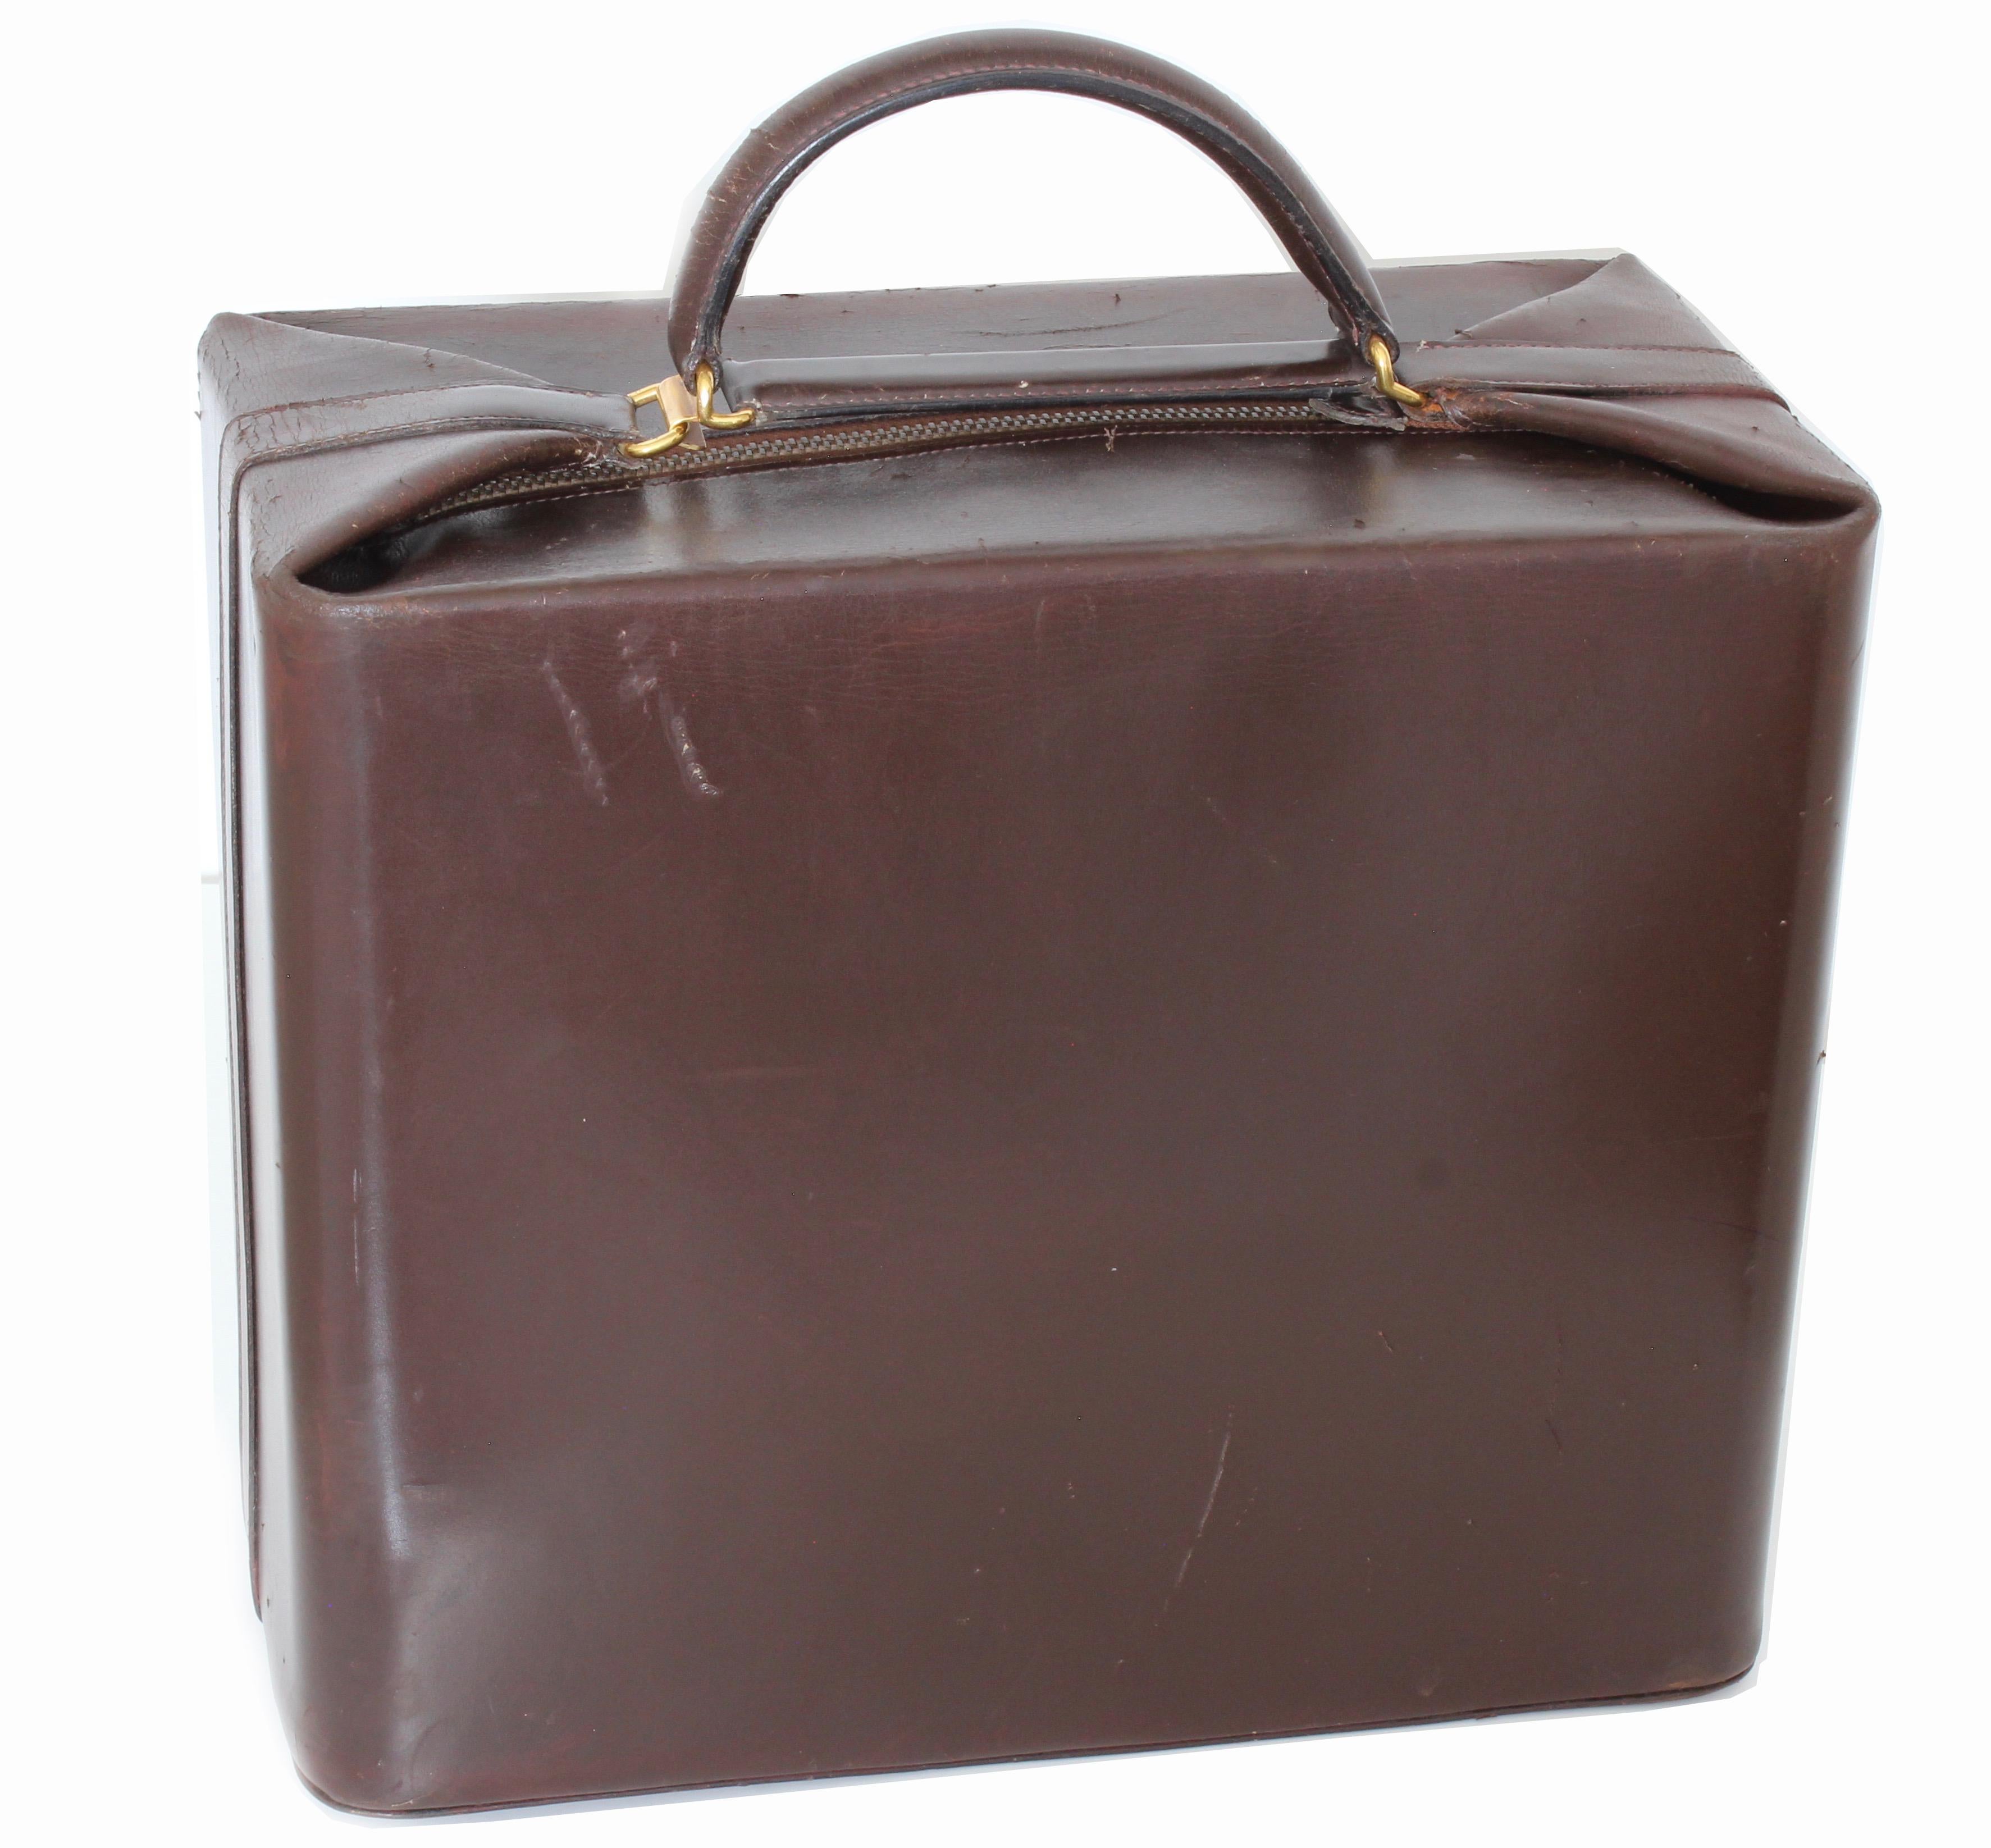 This extremely rare train case or vanity bag was made by Hermes, most likely in the early 1950s.  Made from brown box leather, it features a clasp under the top handle that reveals a long zipper to access the main compartment.  The interior